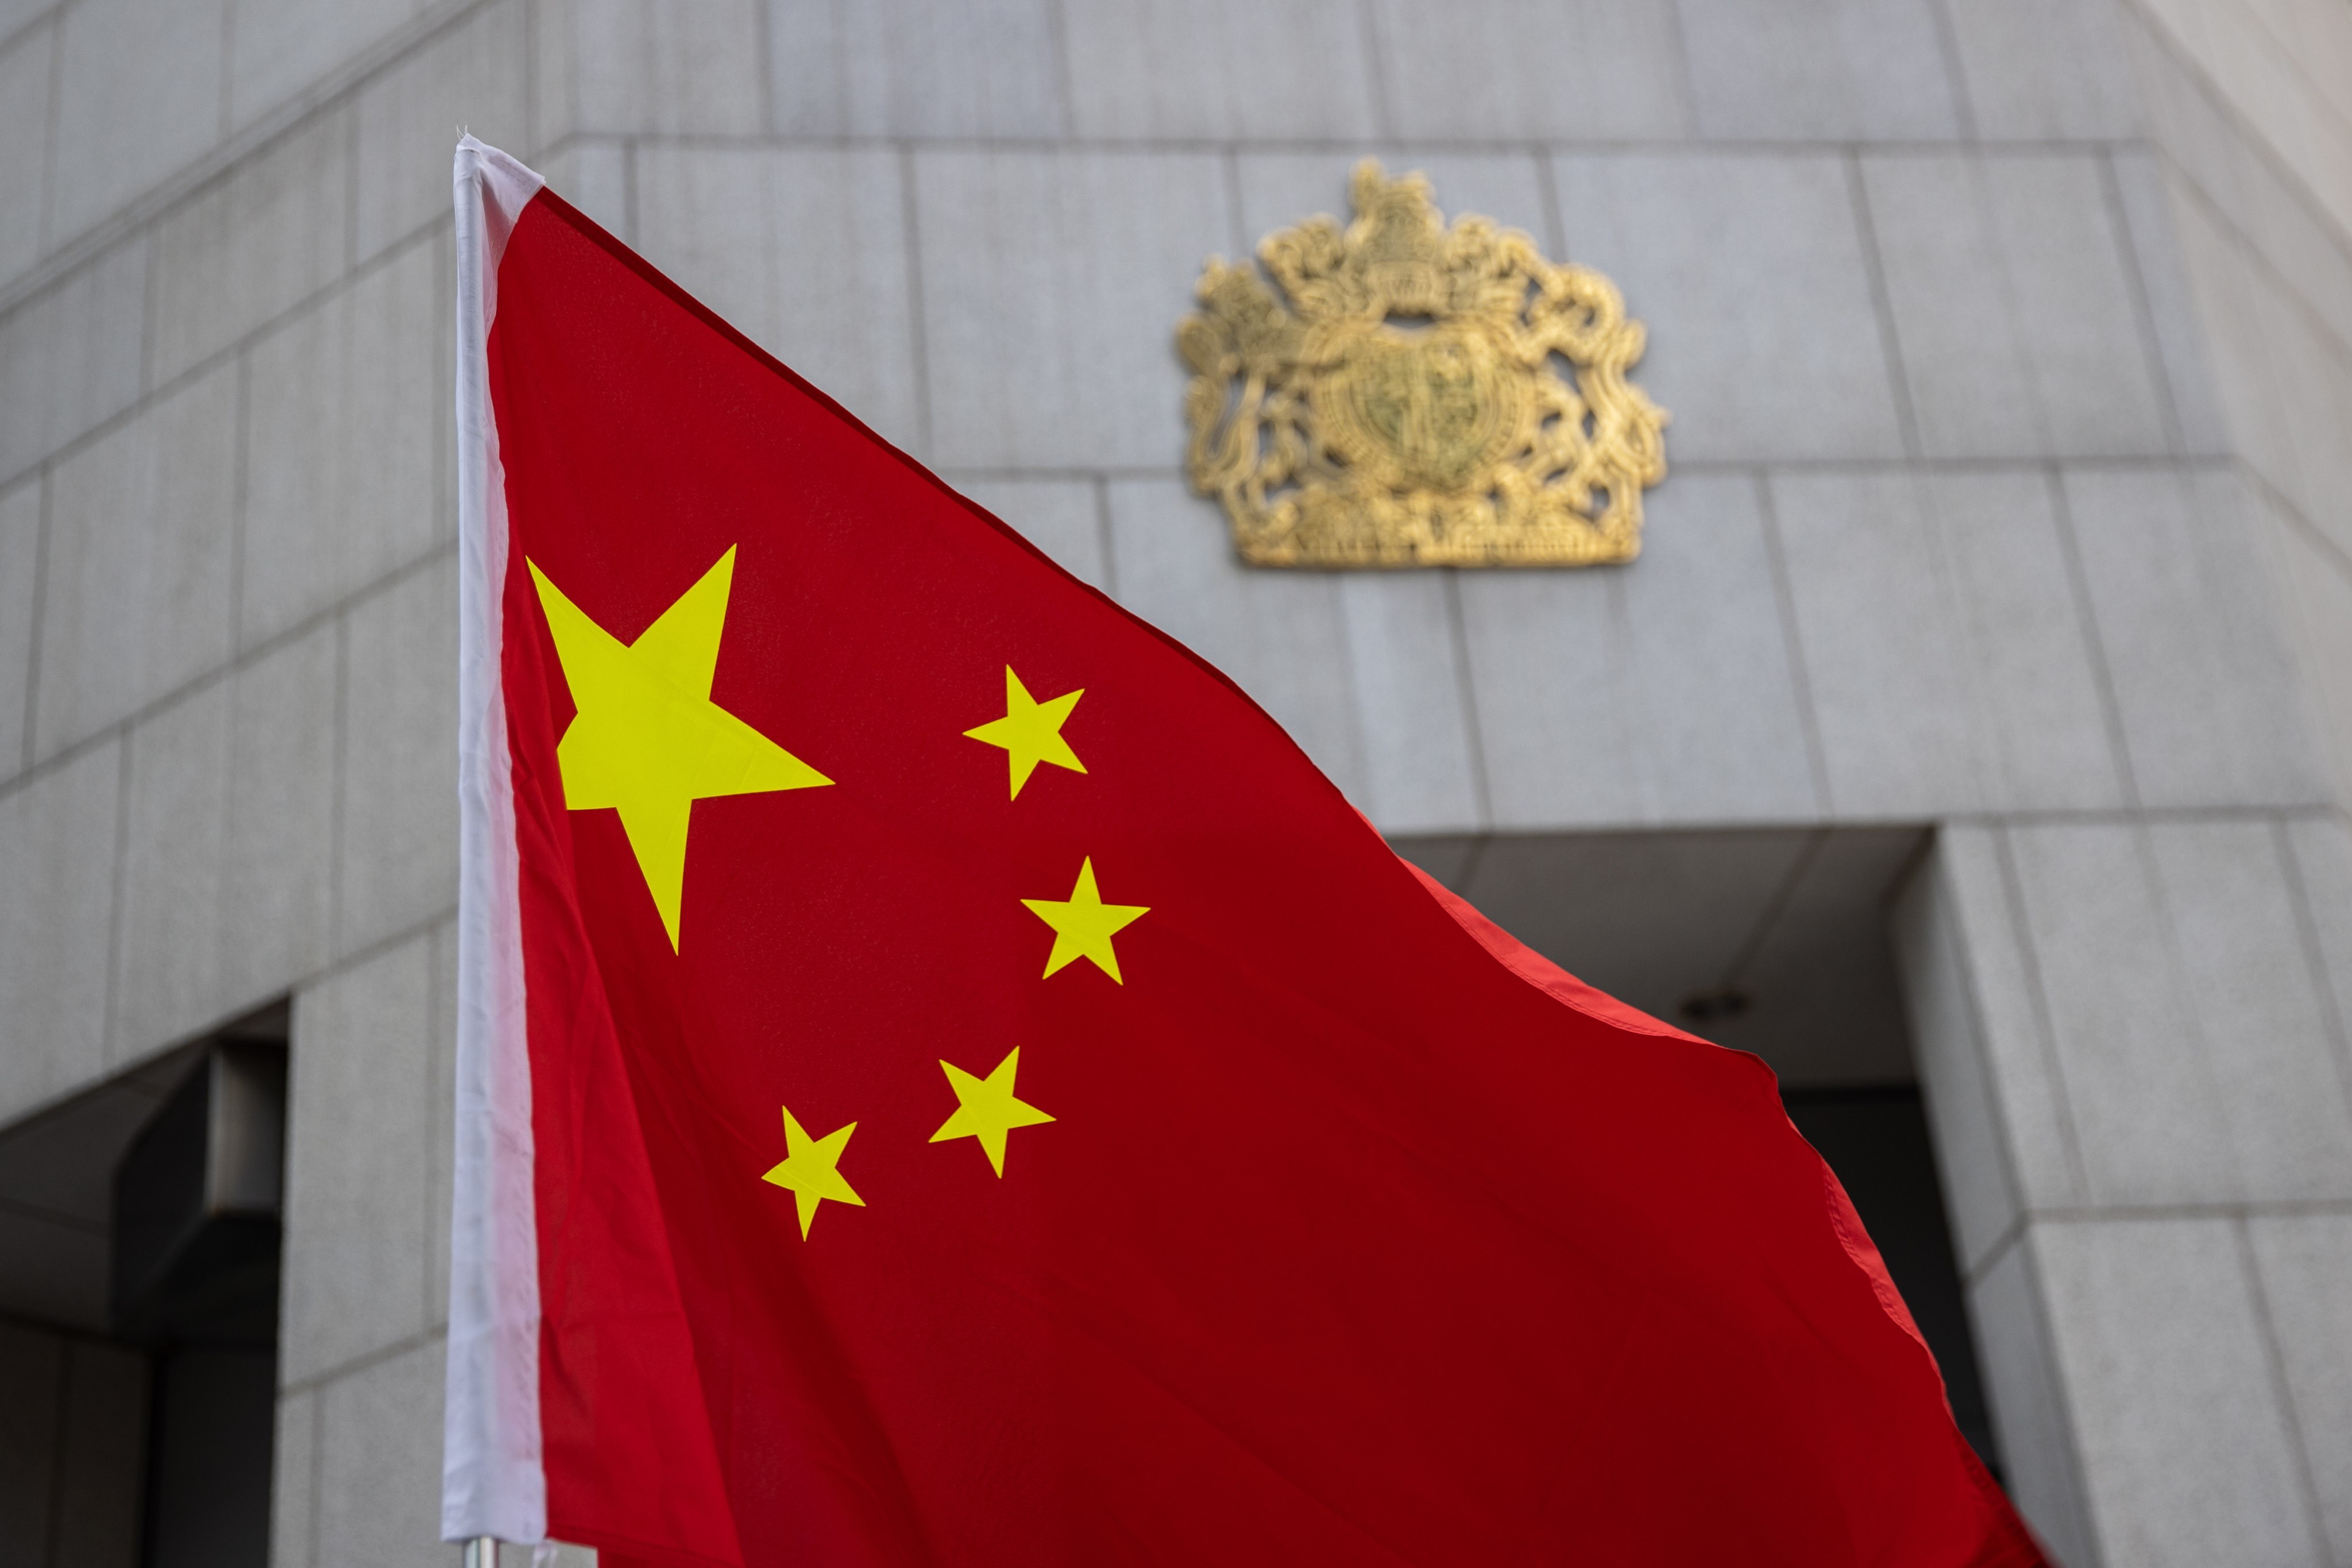 The Chinese flag outside the British consulate in Hong Kong. Photo: EPA